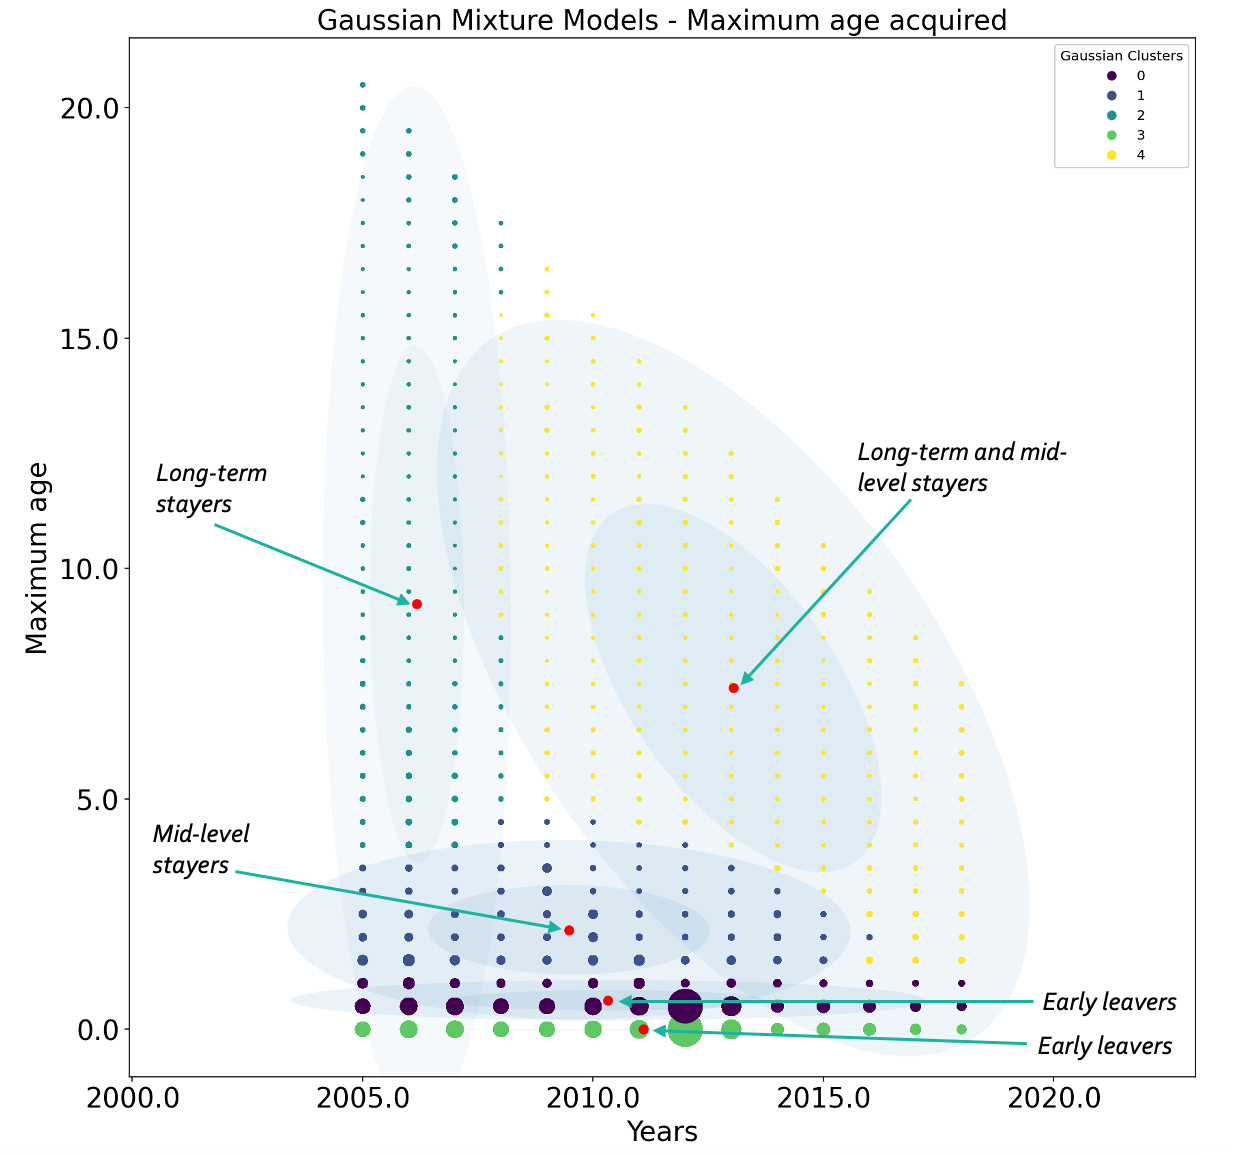 Gaussian Mixture Models: max age acquired over the years